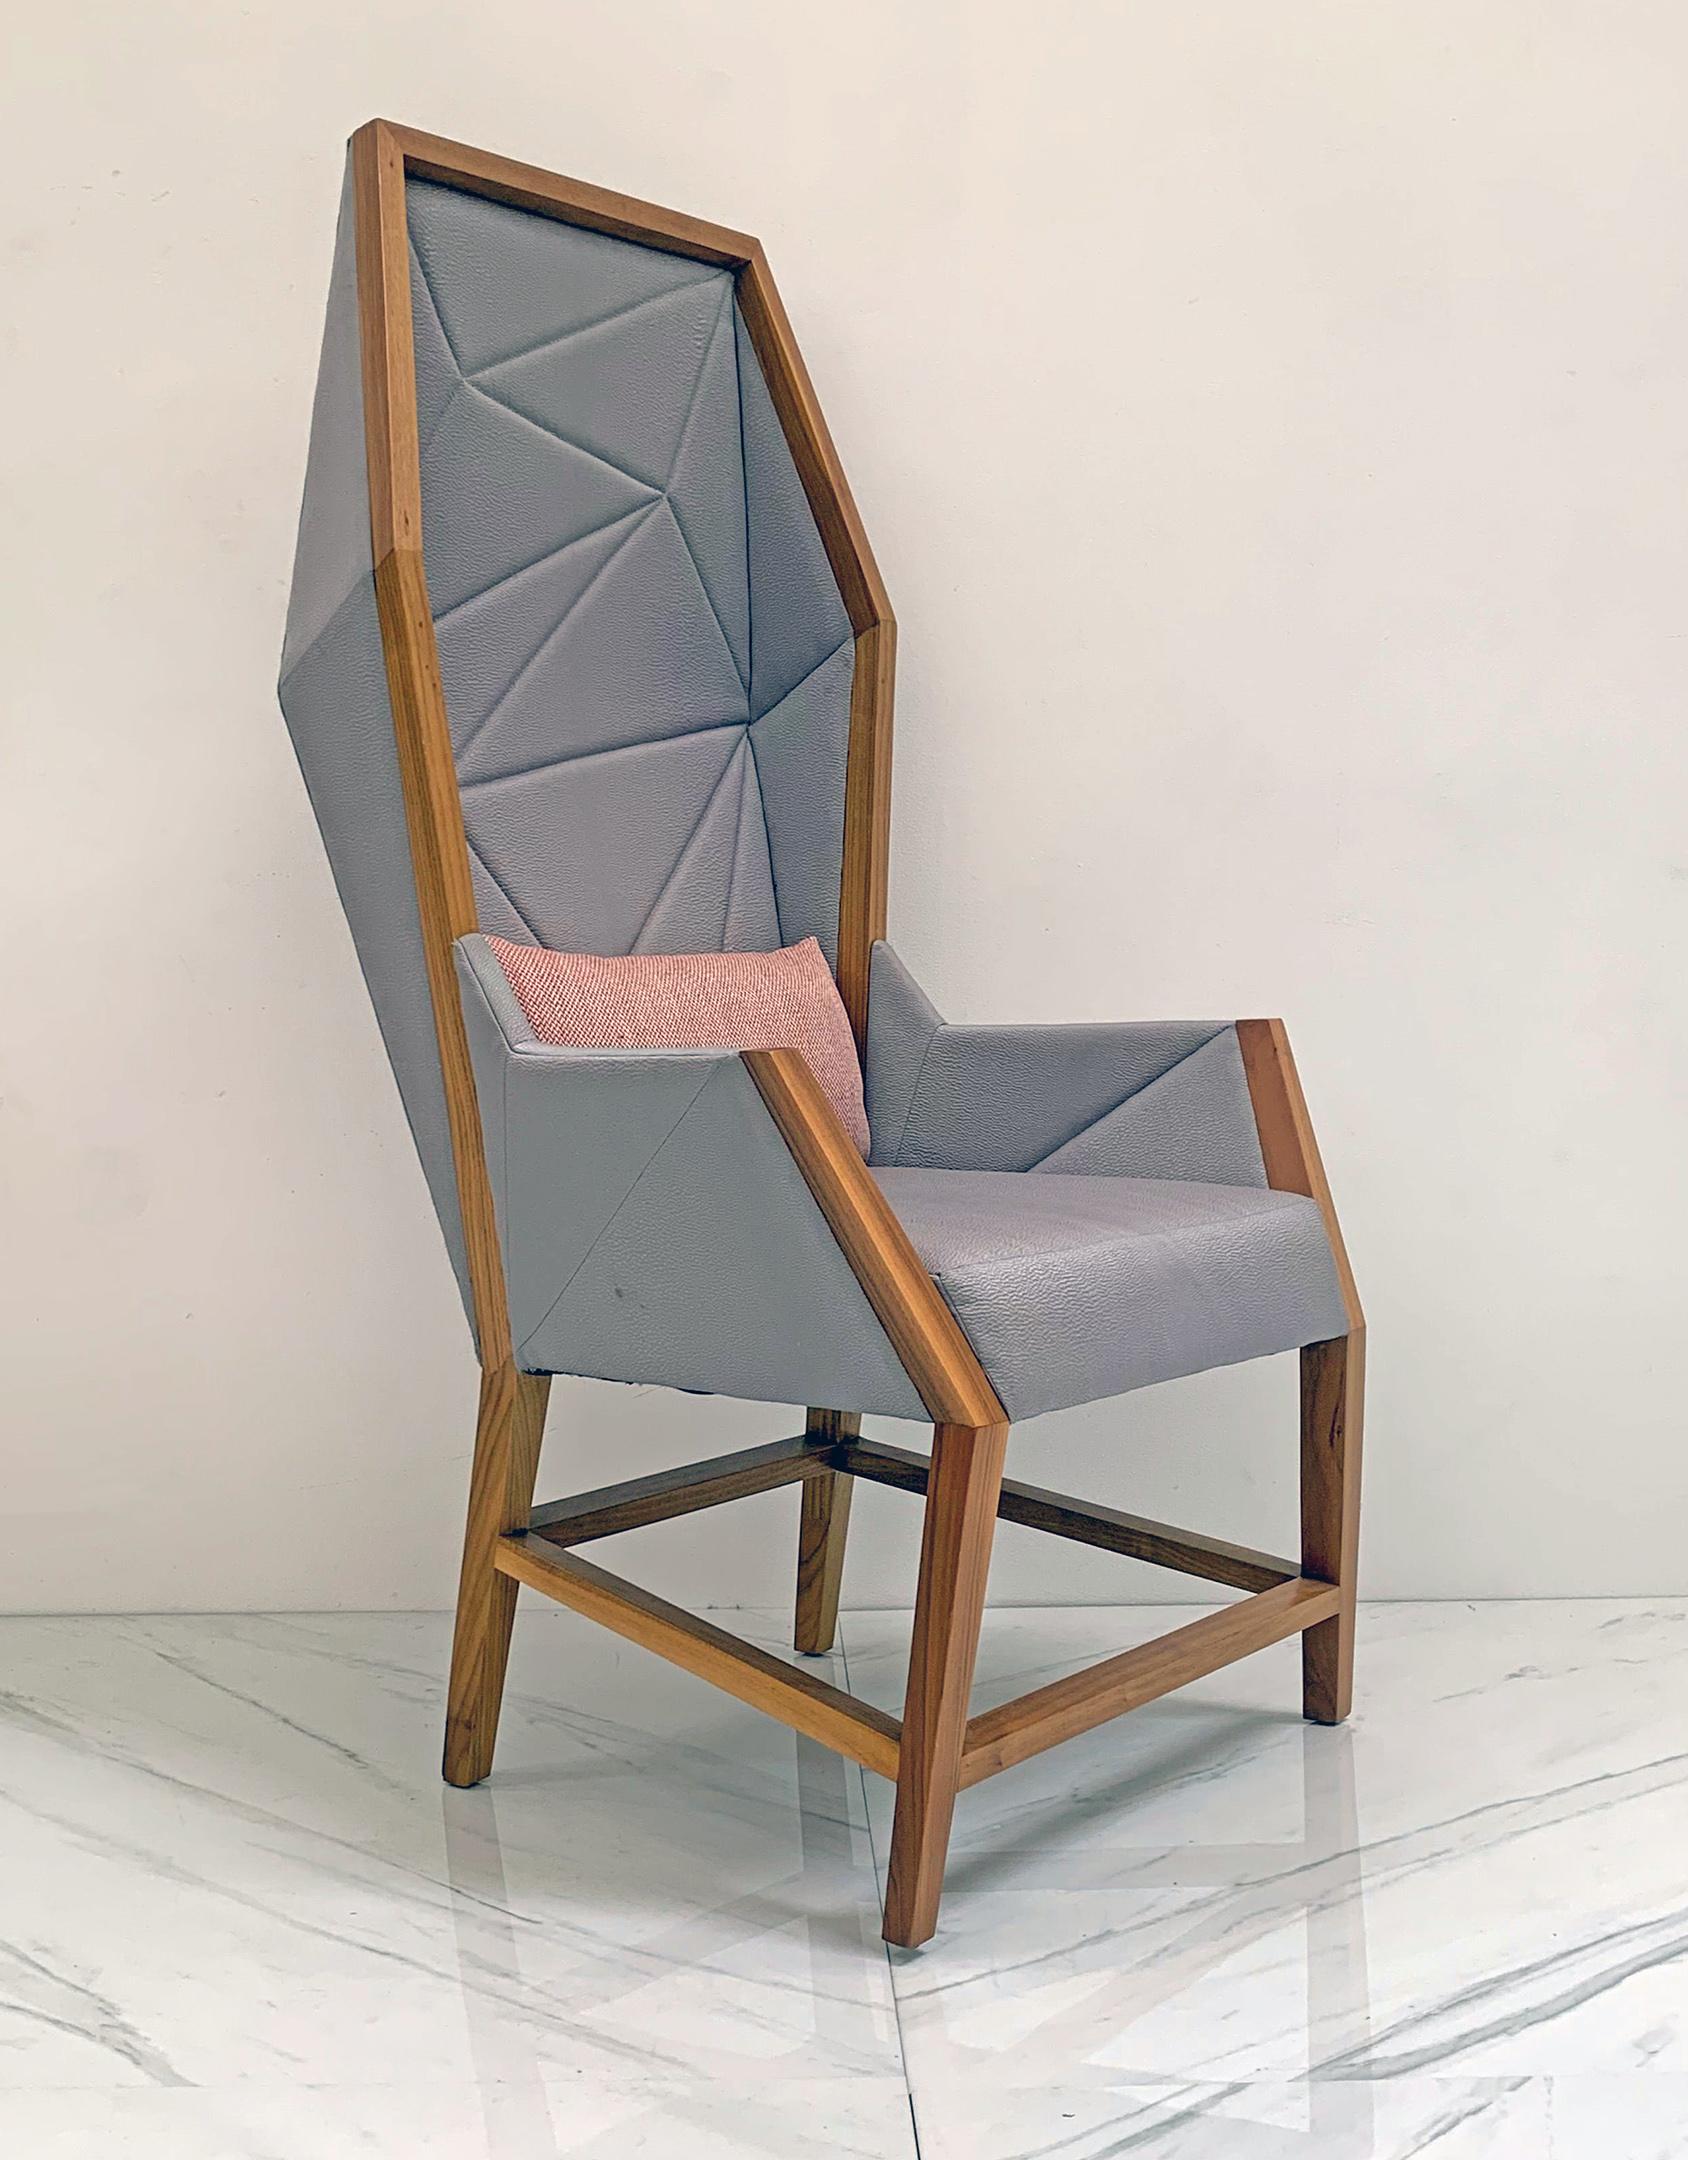 This hooded wingback chair is absolutely gorgeous! Such a statement piece! Inspired by crystalline structures with bias cut hand paneled upholstery and attractive exposed wooden frames, this elegantly modern hooded lounge chair is a not to both new